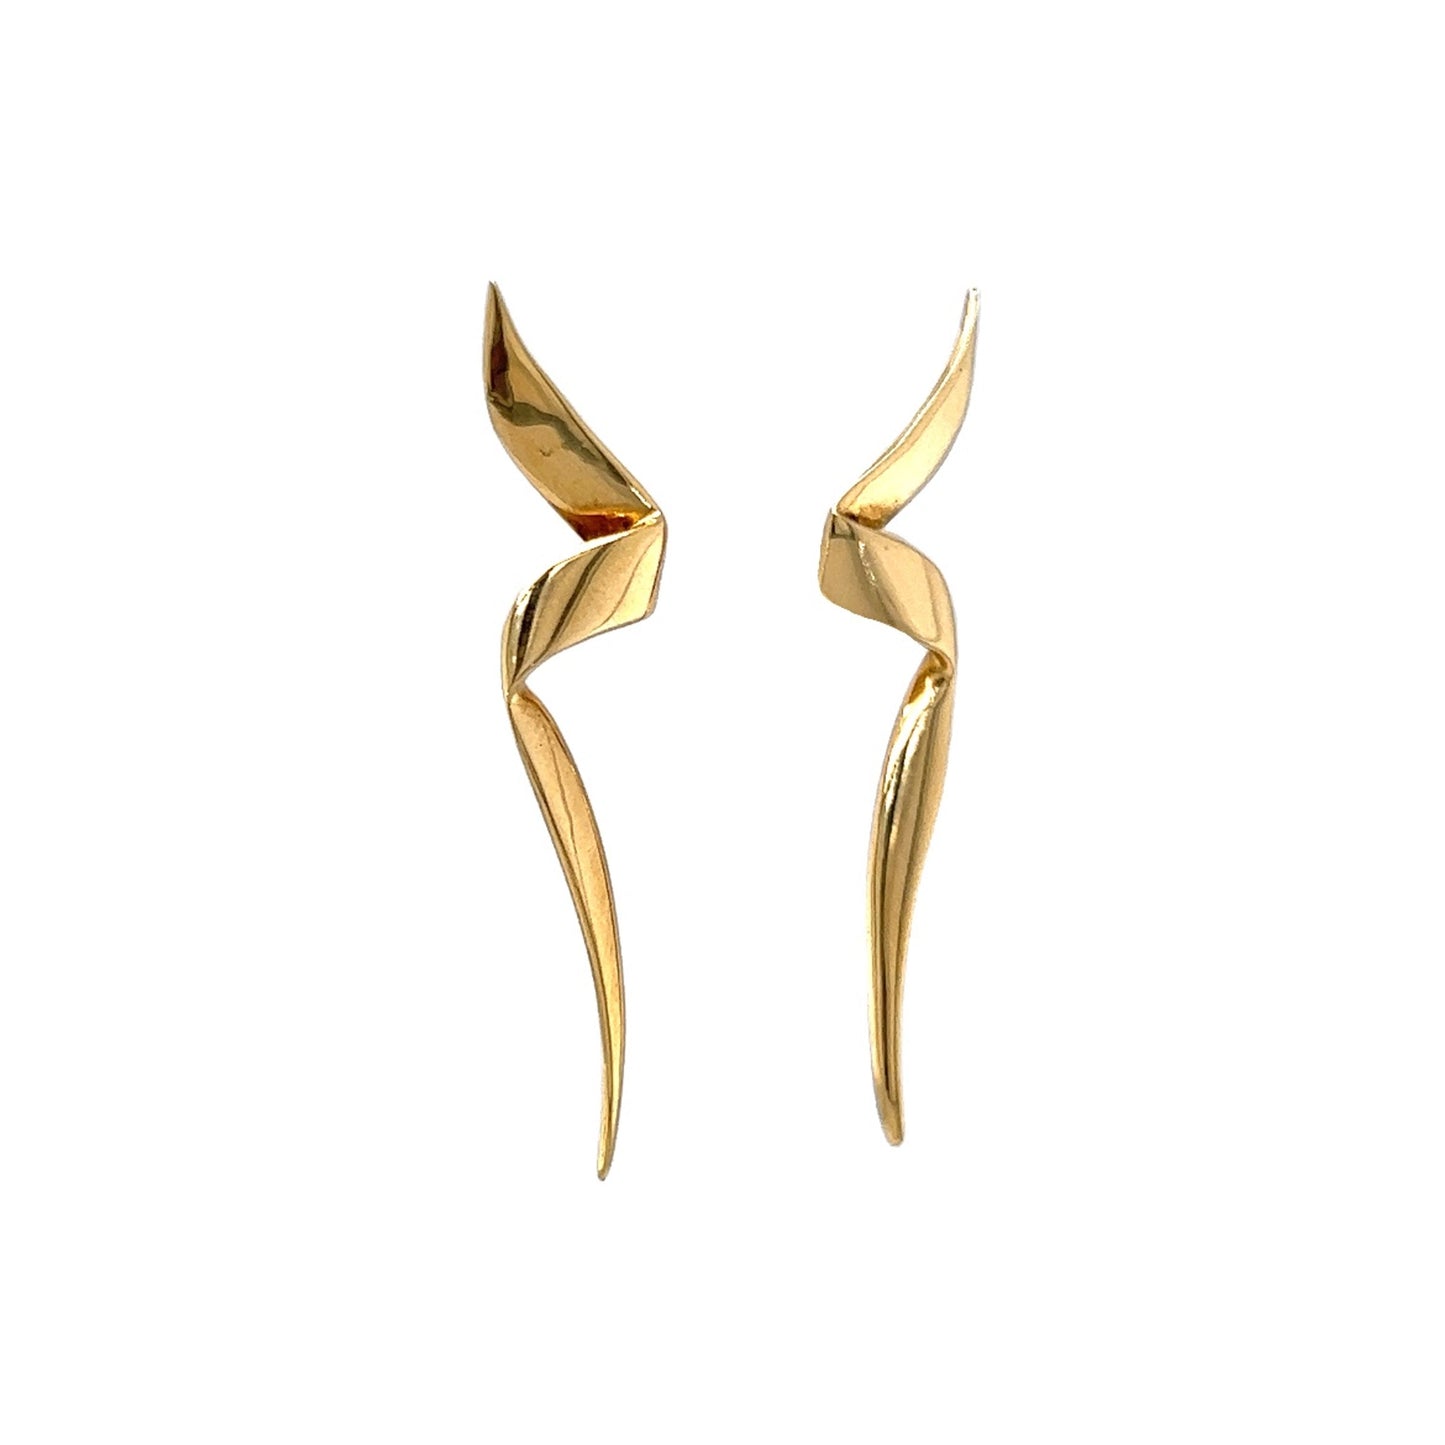 Tiffany & Co. Paloma Picasso Earrings in 18k Yellow Gold